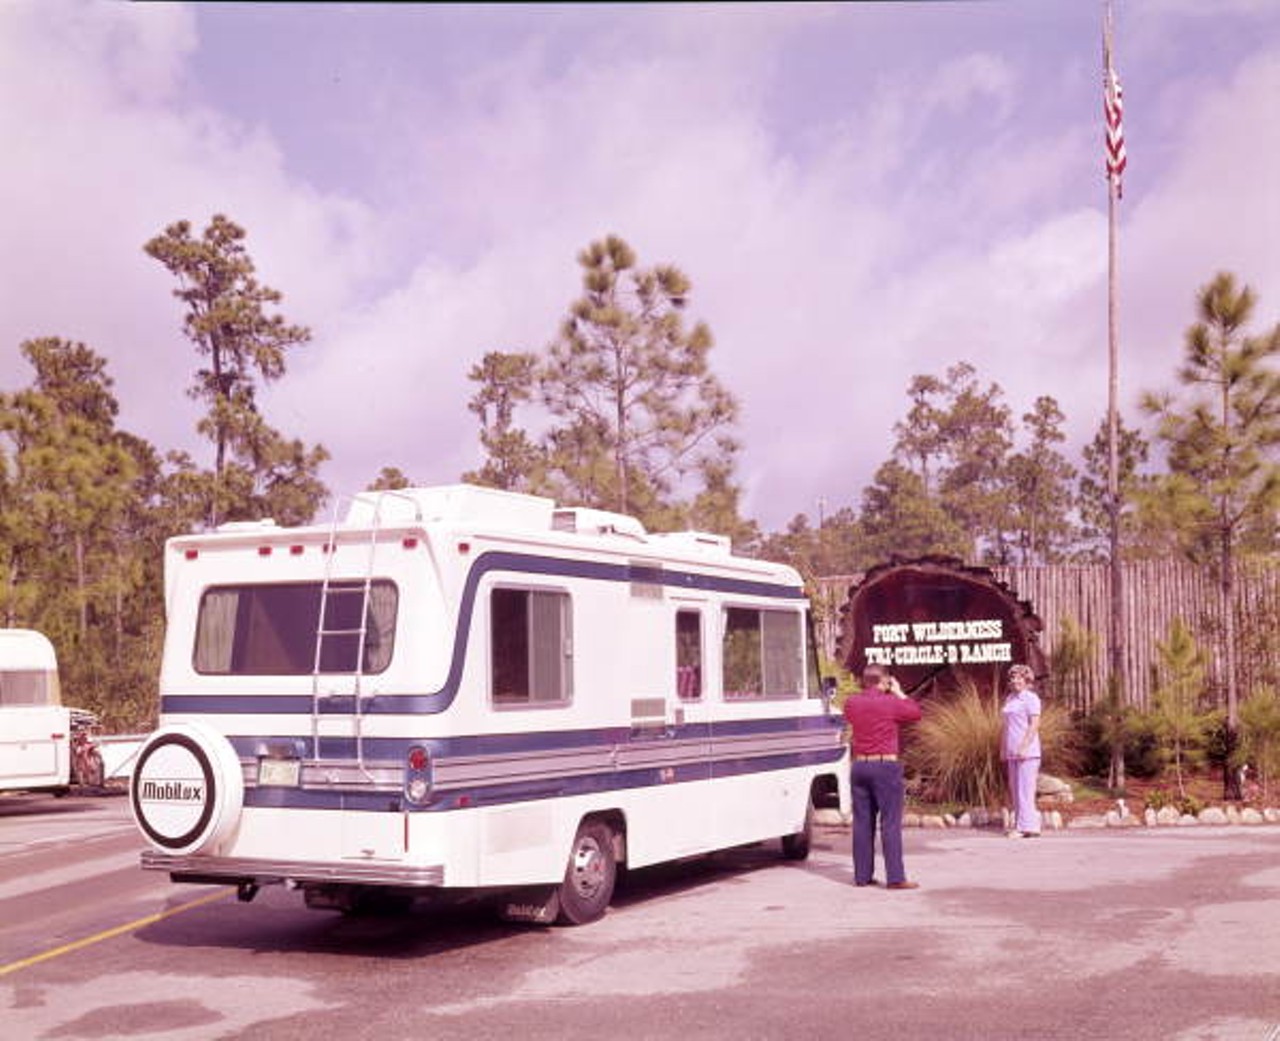 View of couple with their camper at the Walt Disney World Resort "Fort Wilderness" campground - Orlando, Florida, 1971